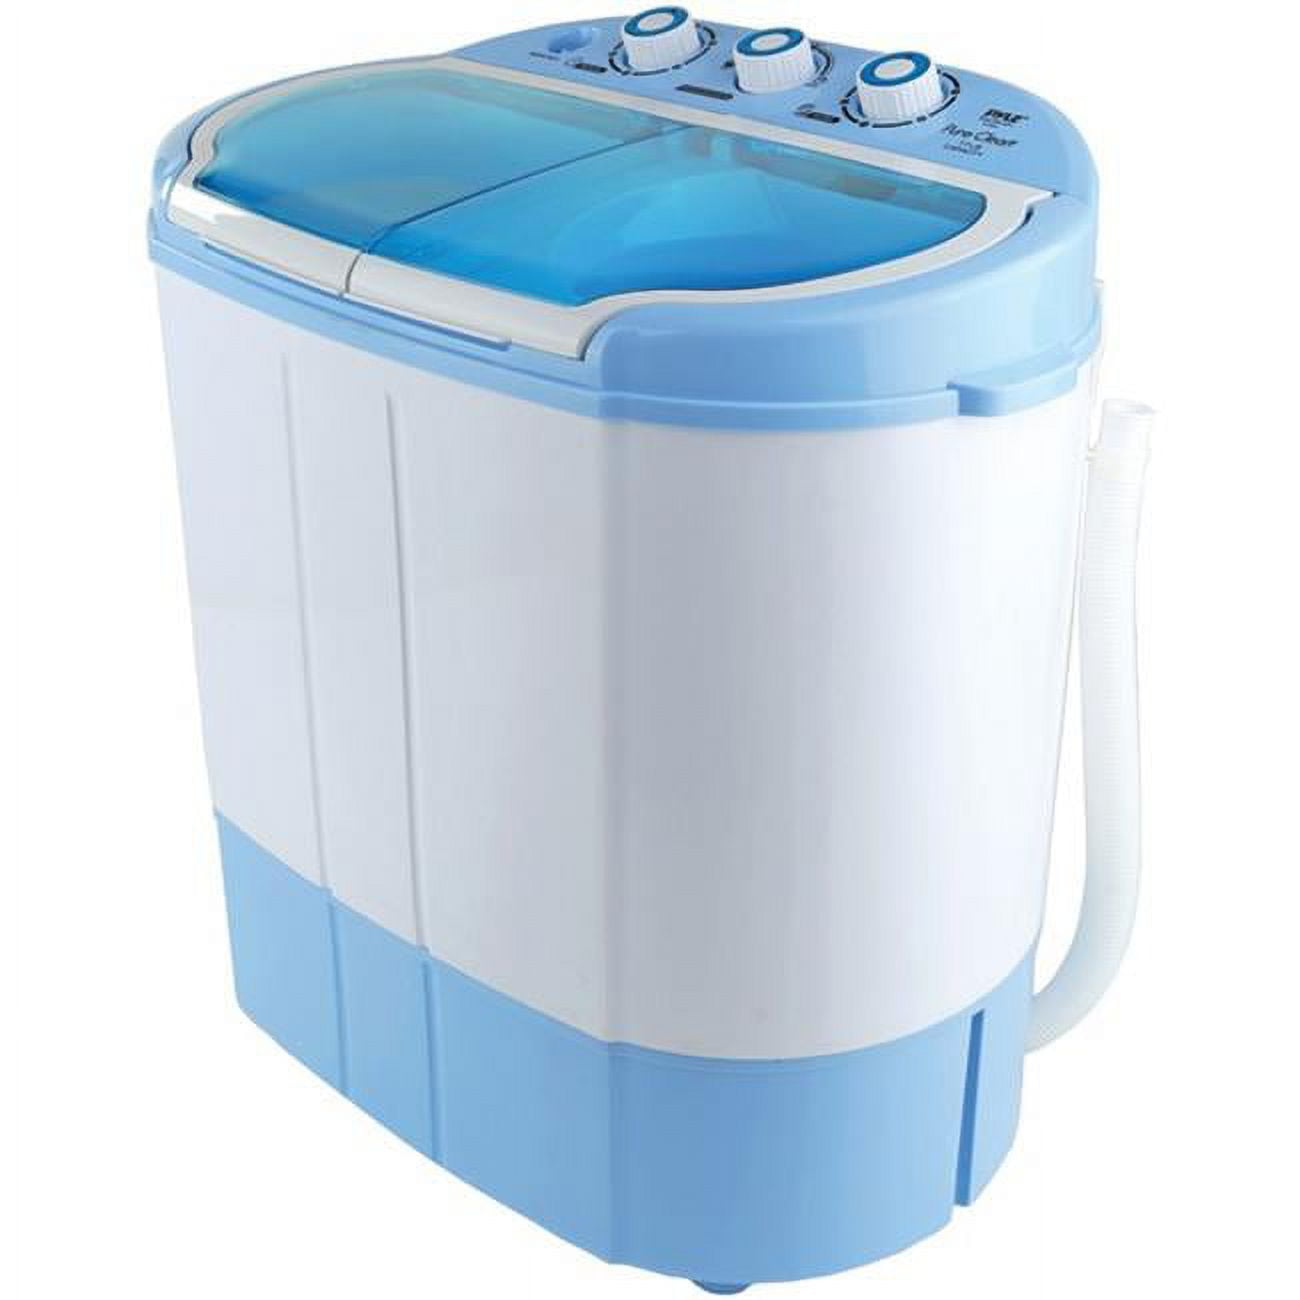 Portable Mini Washing Machine, Compact Twin Tub Washer (8.8lbs) and Spin  Dryer Combo (3.3lbs), Timer Control with Soaking Function Ideal for Dorms